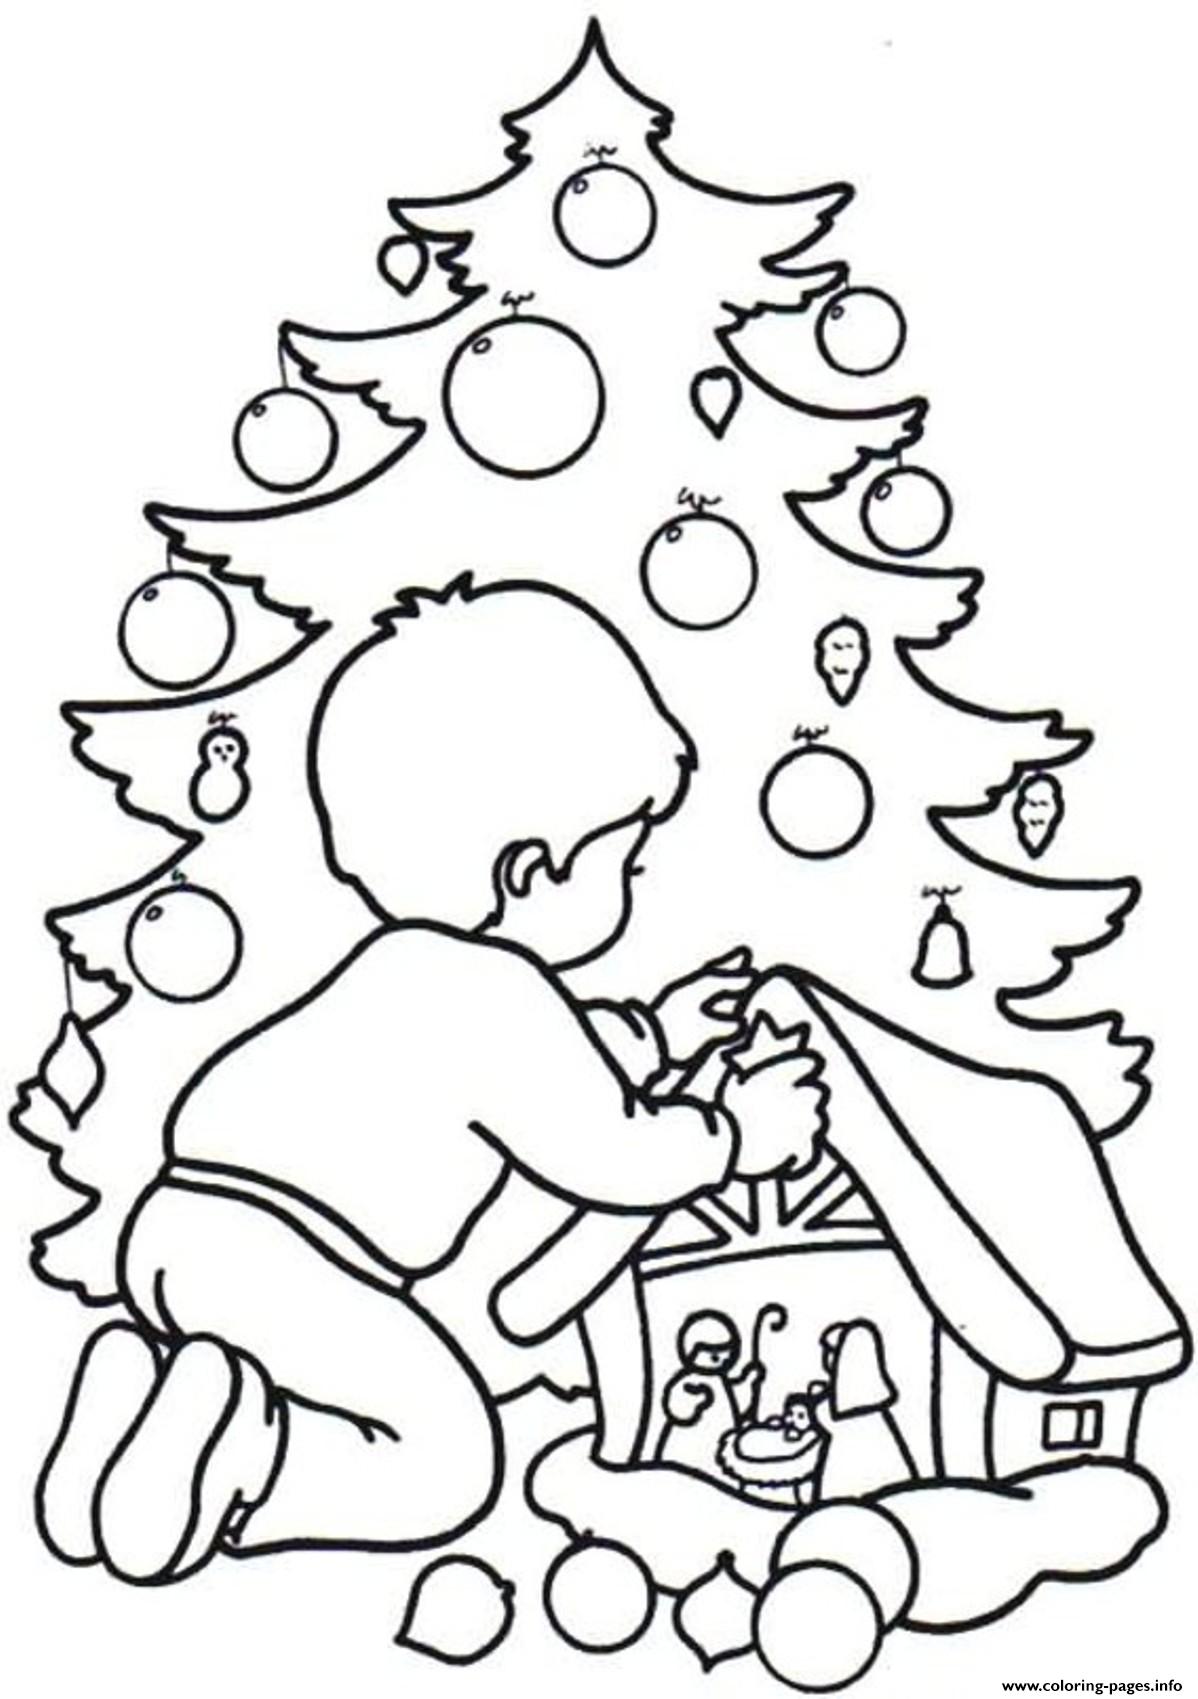 Christmas Printable S Kid Making Crafte816 coloring